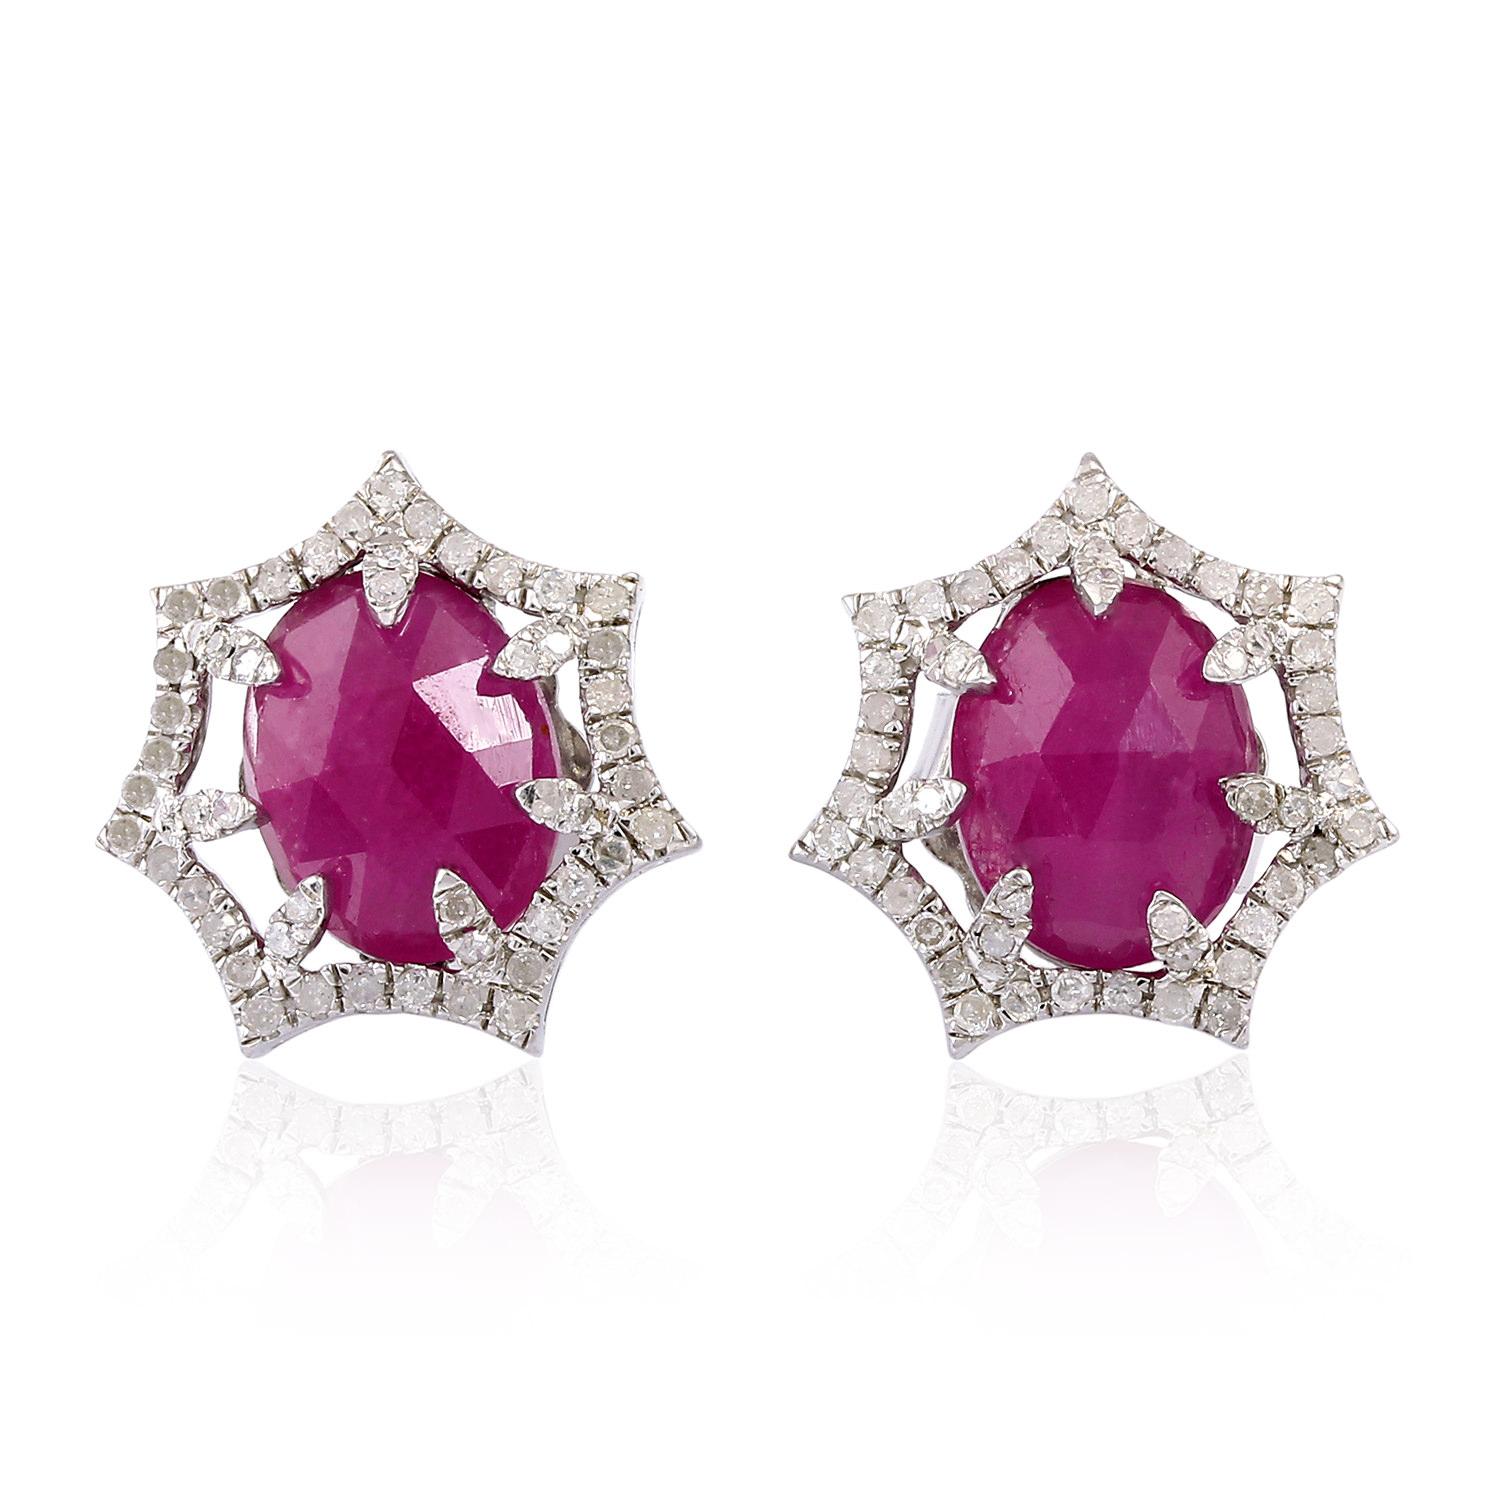 Cast from 18-karat gold and sterling silver. These beautiful stud earrings are set with 5.2 carat rubies & .57 carats of sparkling diamonds. Wear yours day or night, gently tucking hair behind your ear to keep them in focus.

FOLLOW  MEGHNA JEWELS